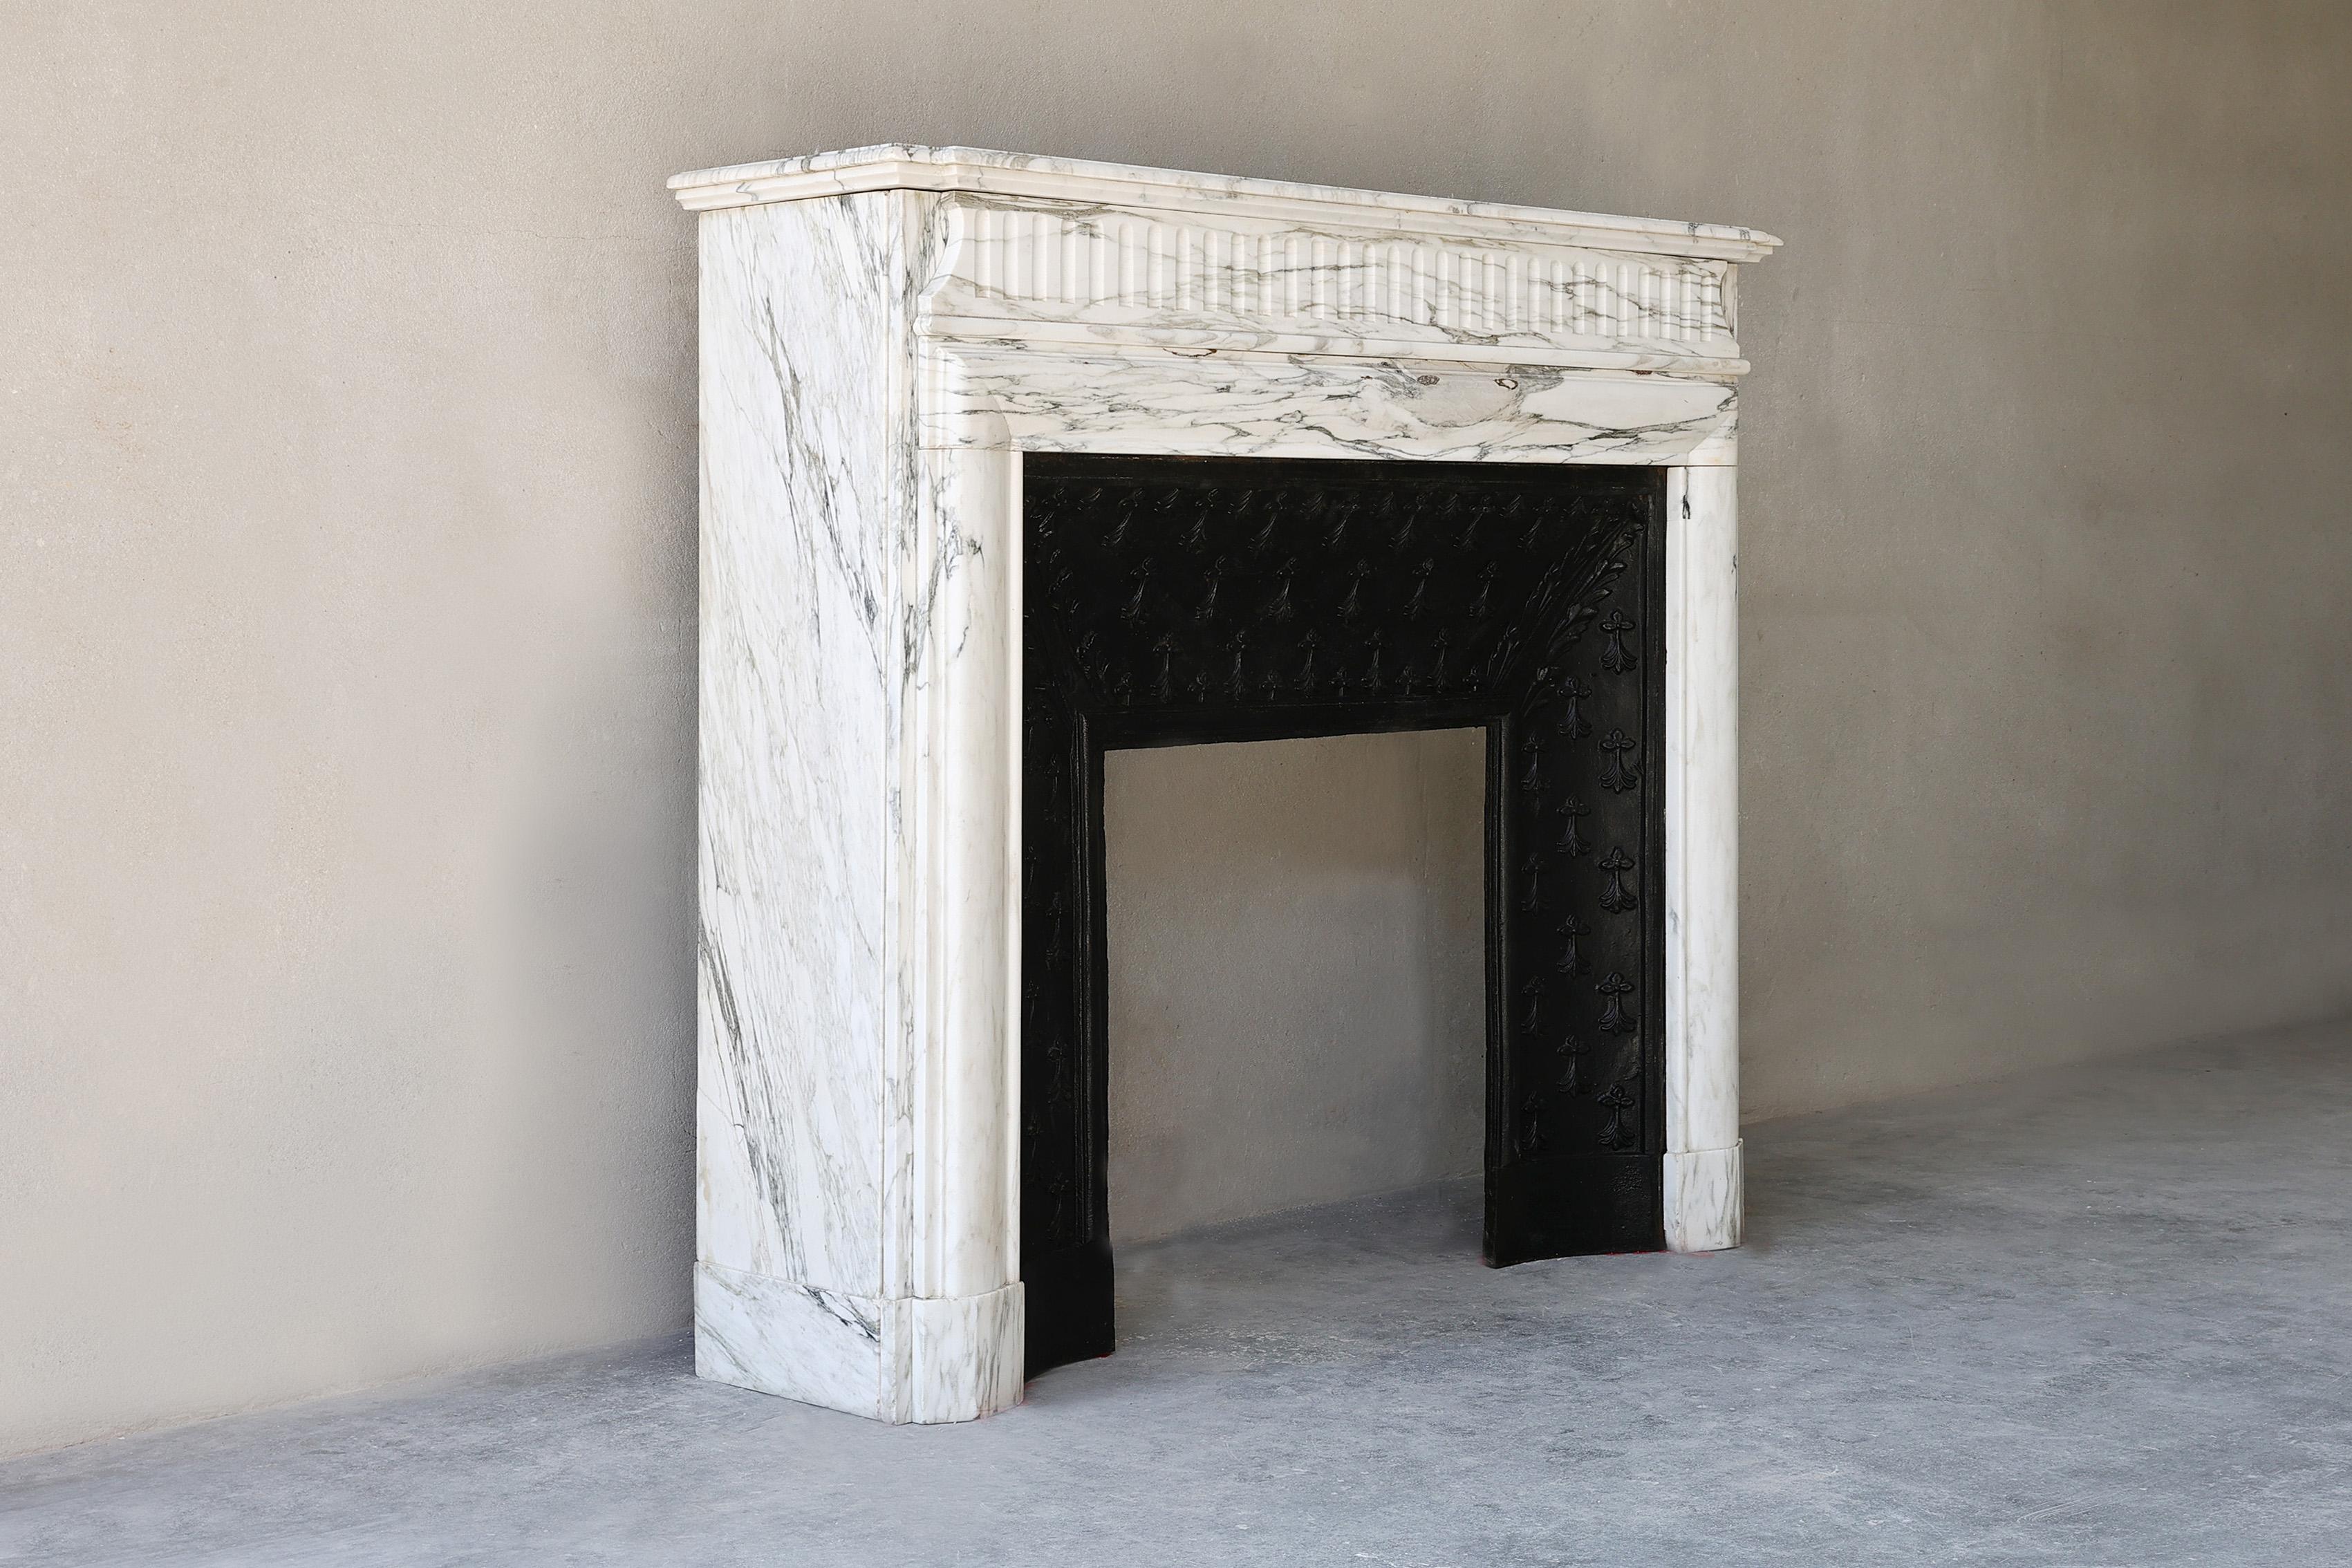 Other Carrara marble fireplace from the 19th century in style of Louis XIV